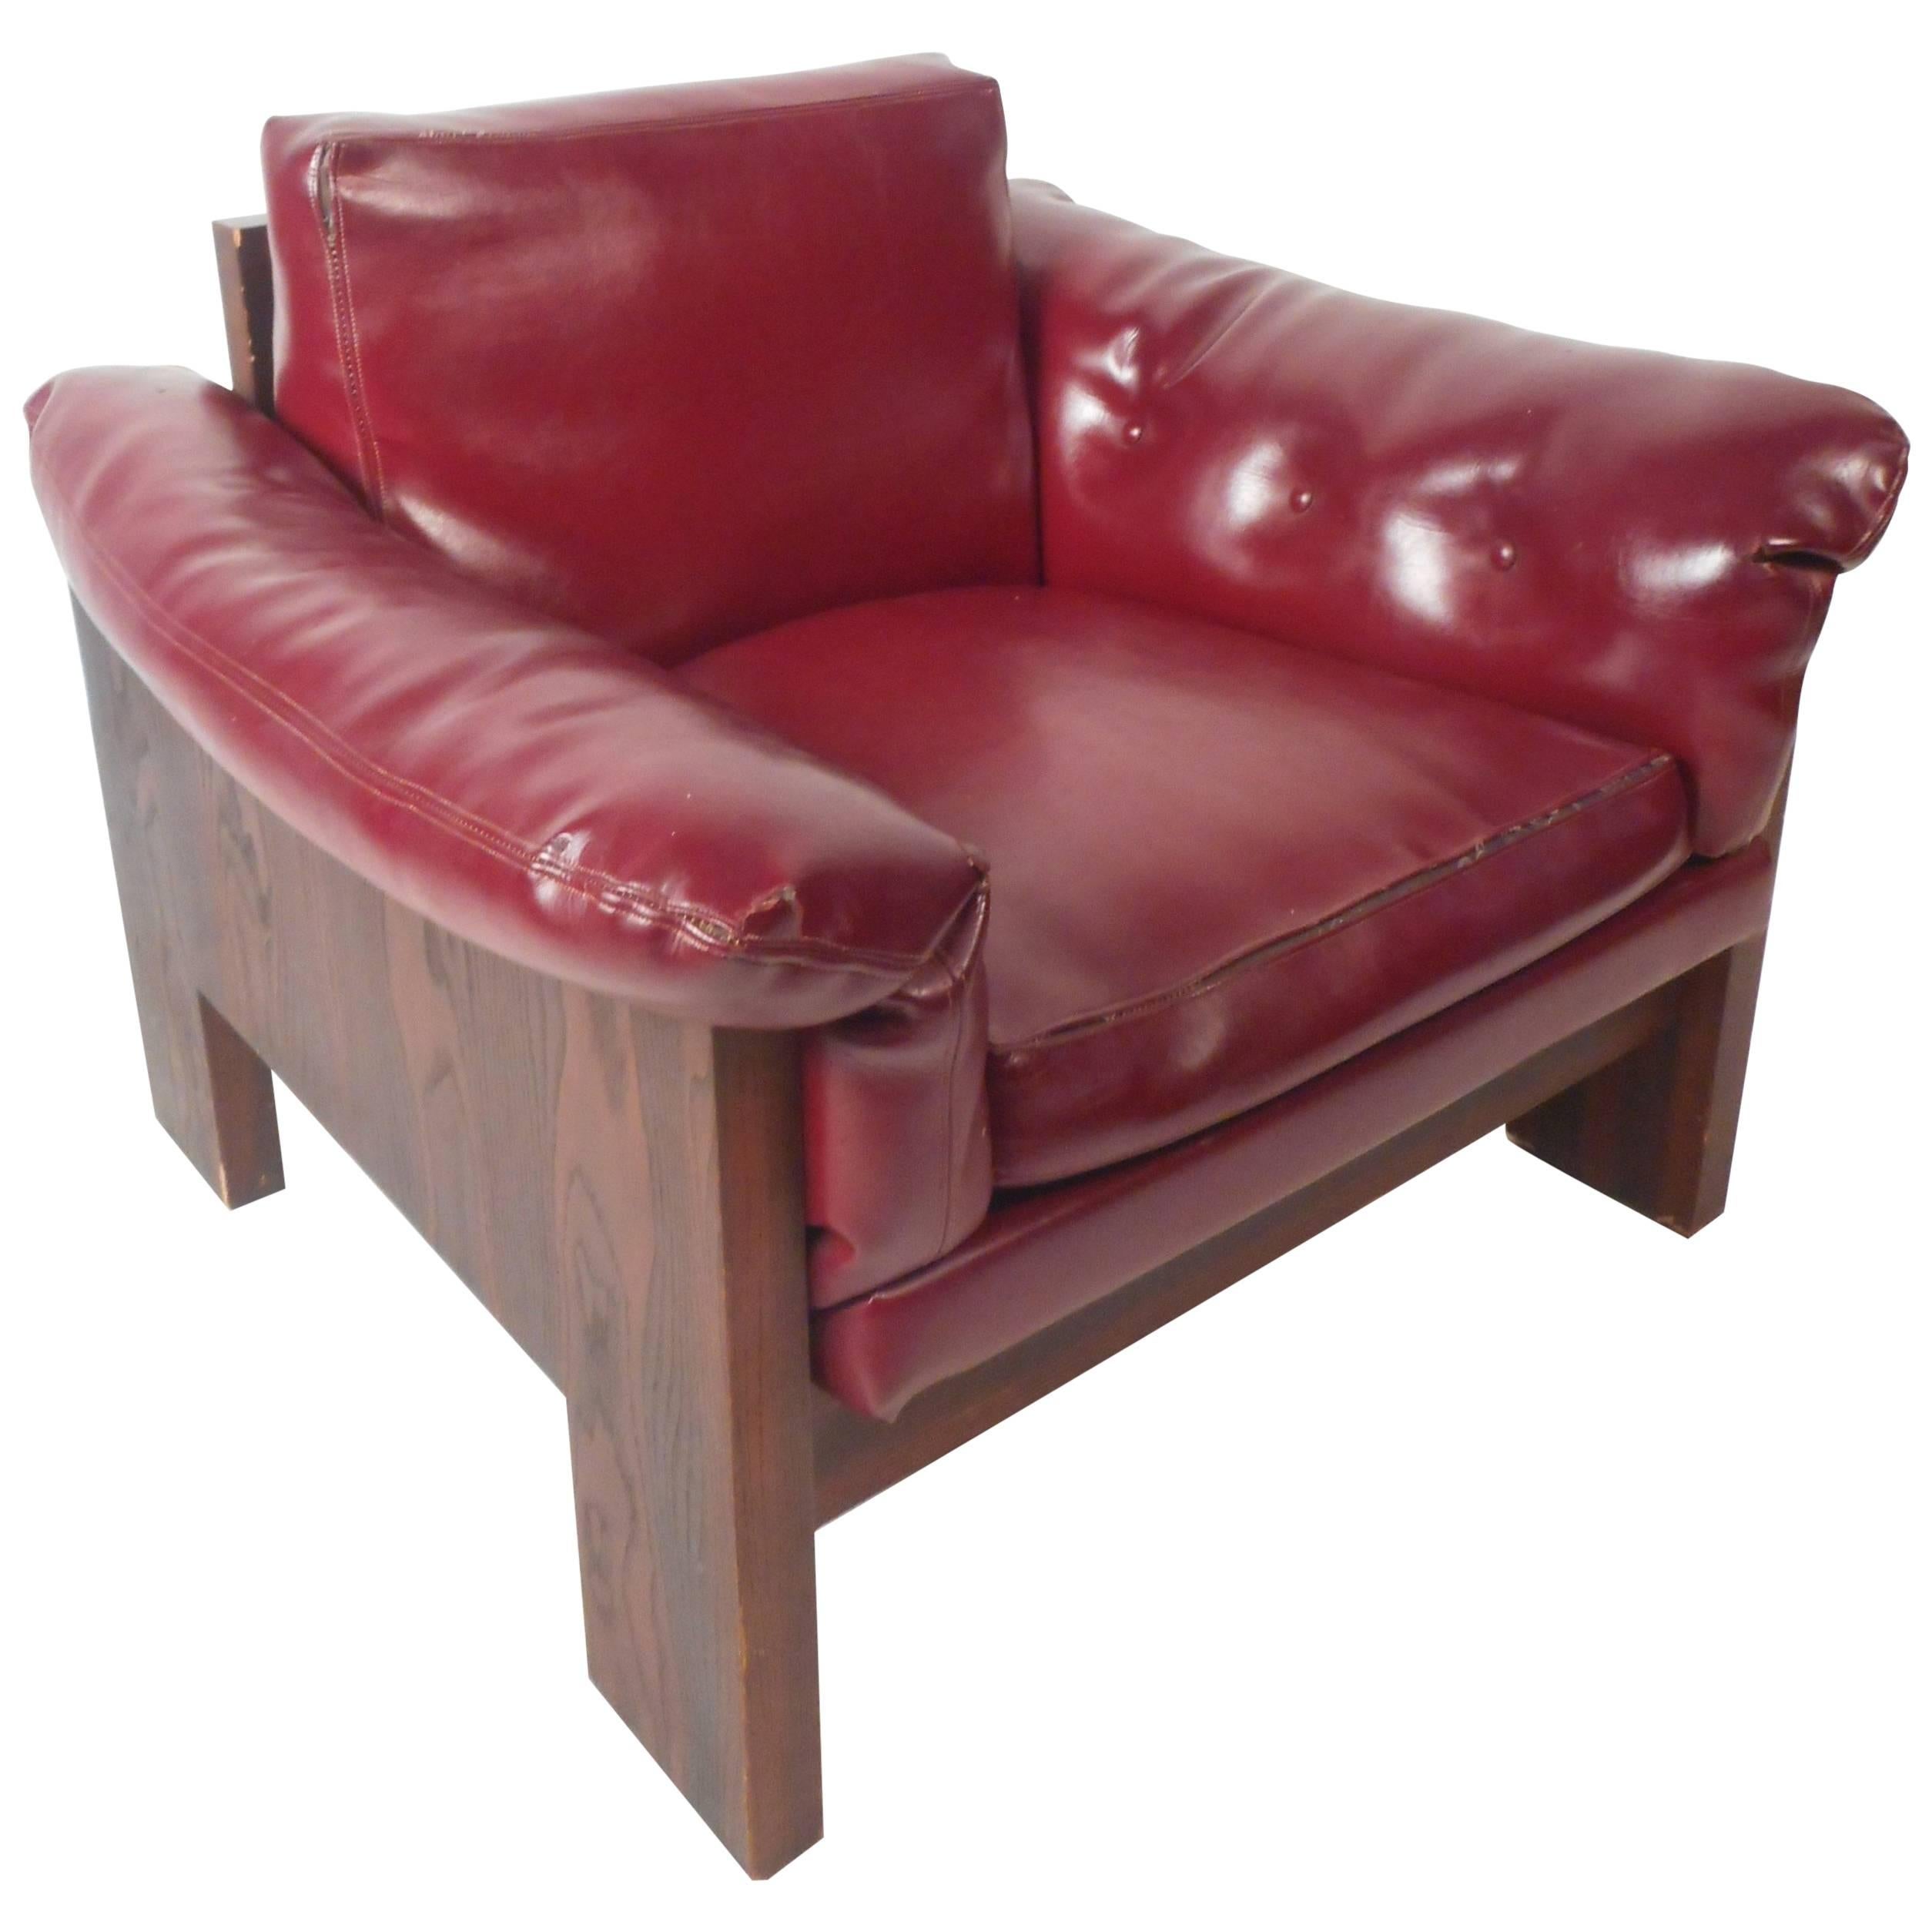 Mid-Century Modern Rosewood Lounge Chair by Milo Baughman for Thayer Coggin